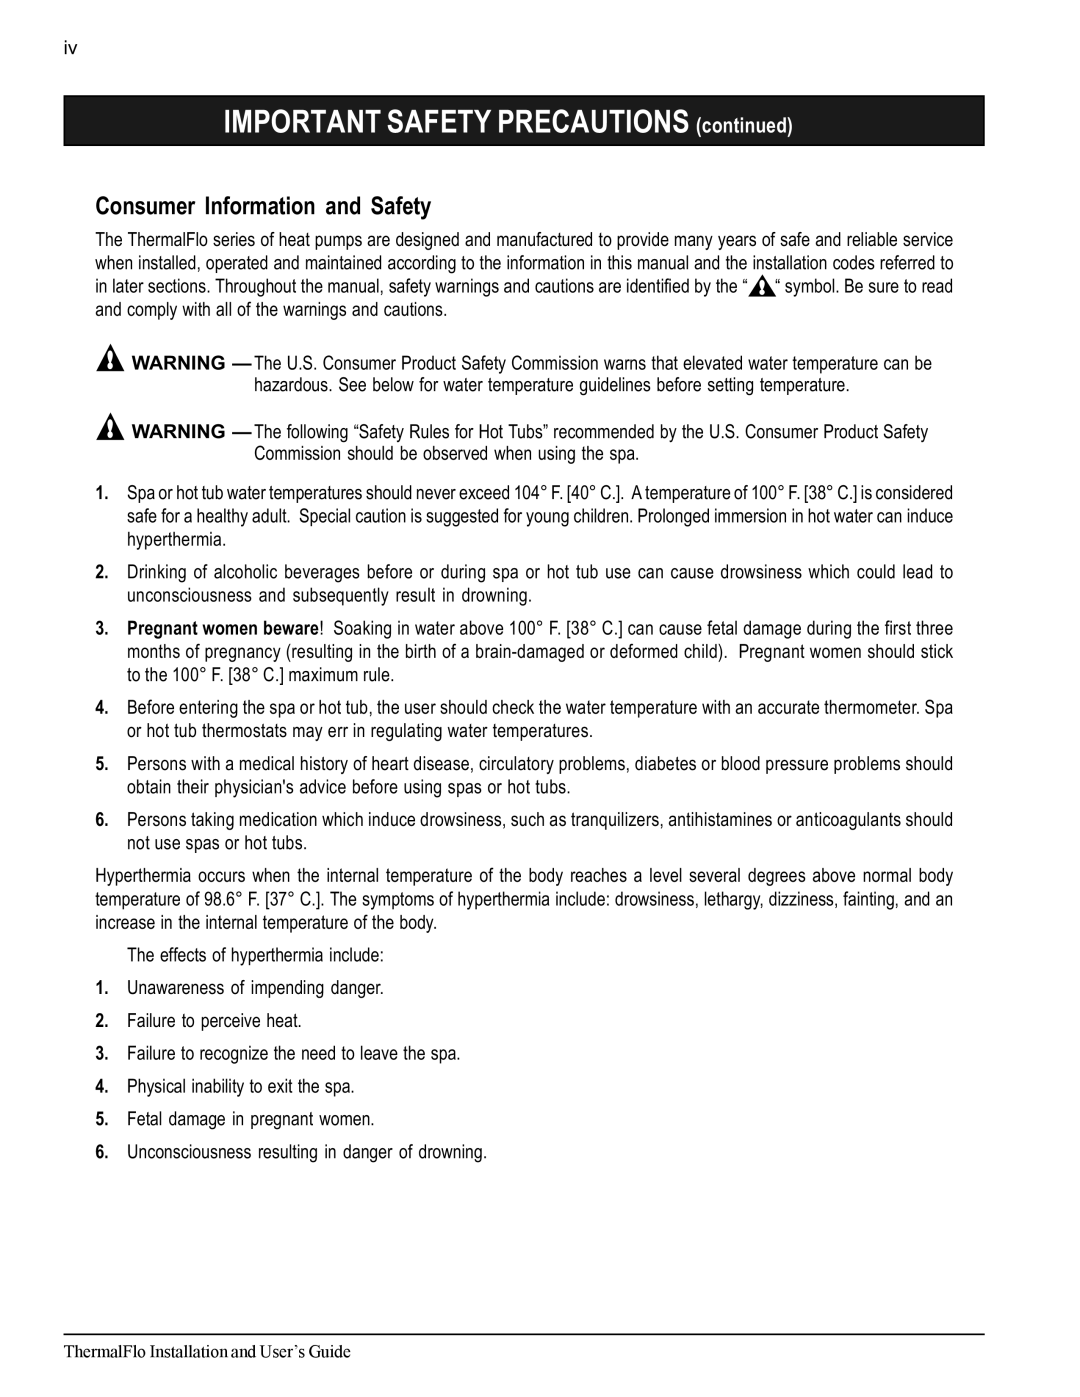 Pentair ThermalFlo important safety instructions Important Safety Precautions, Consumer Information and Safety 